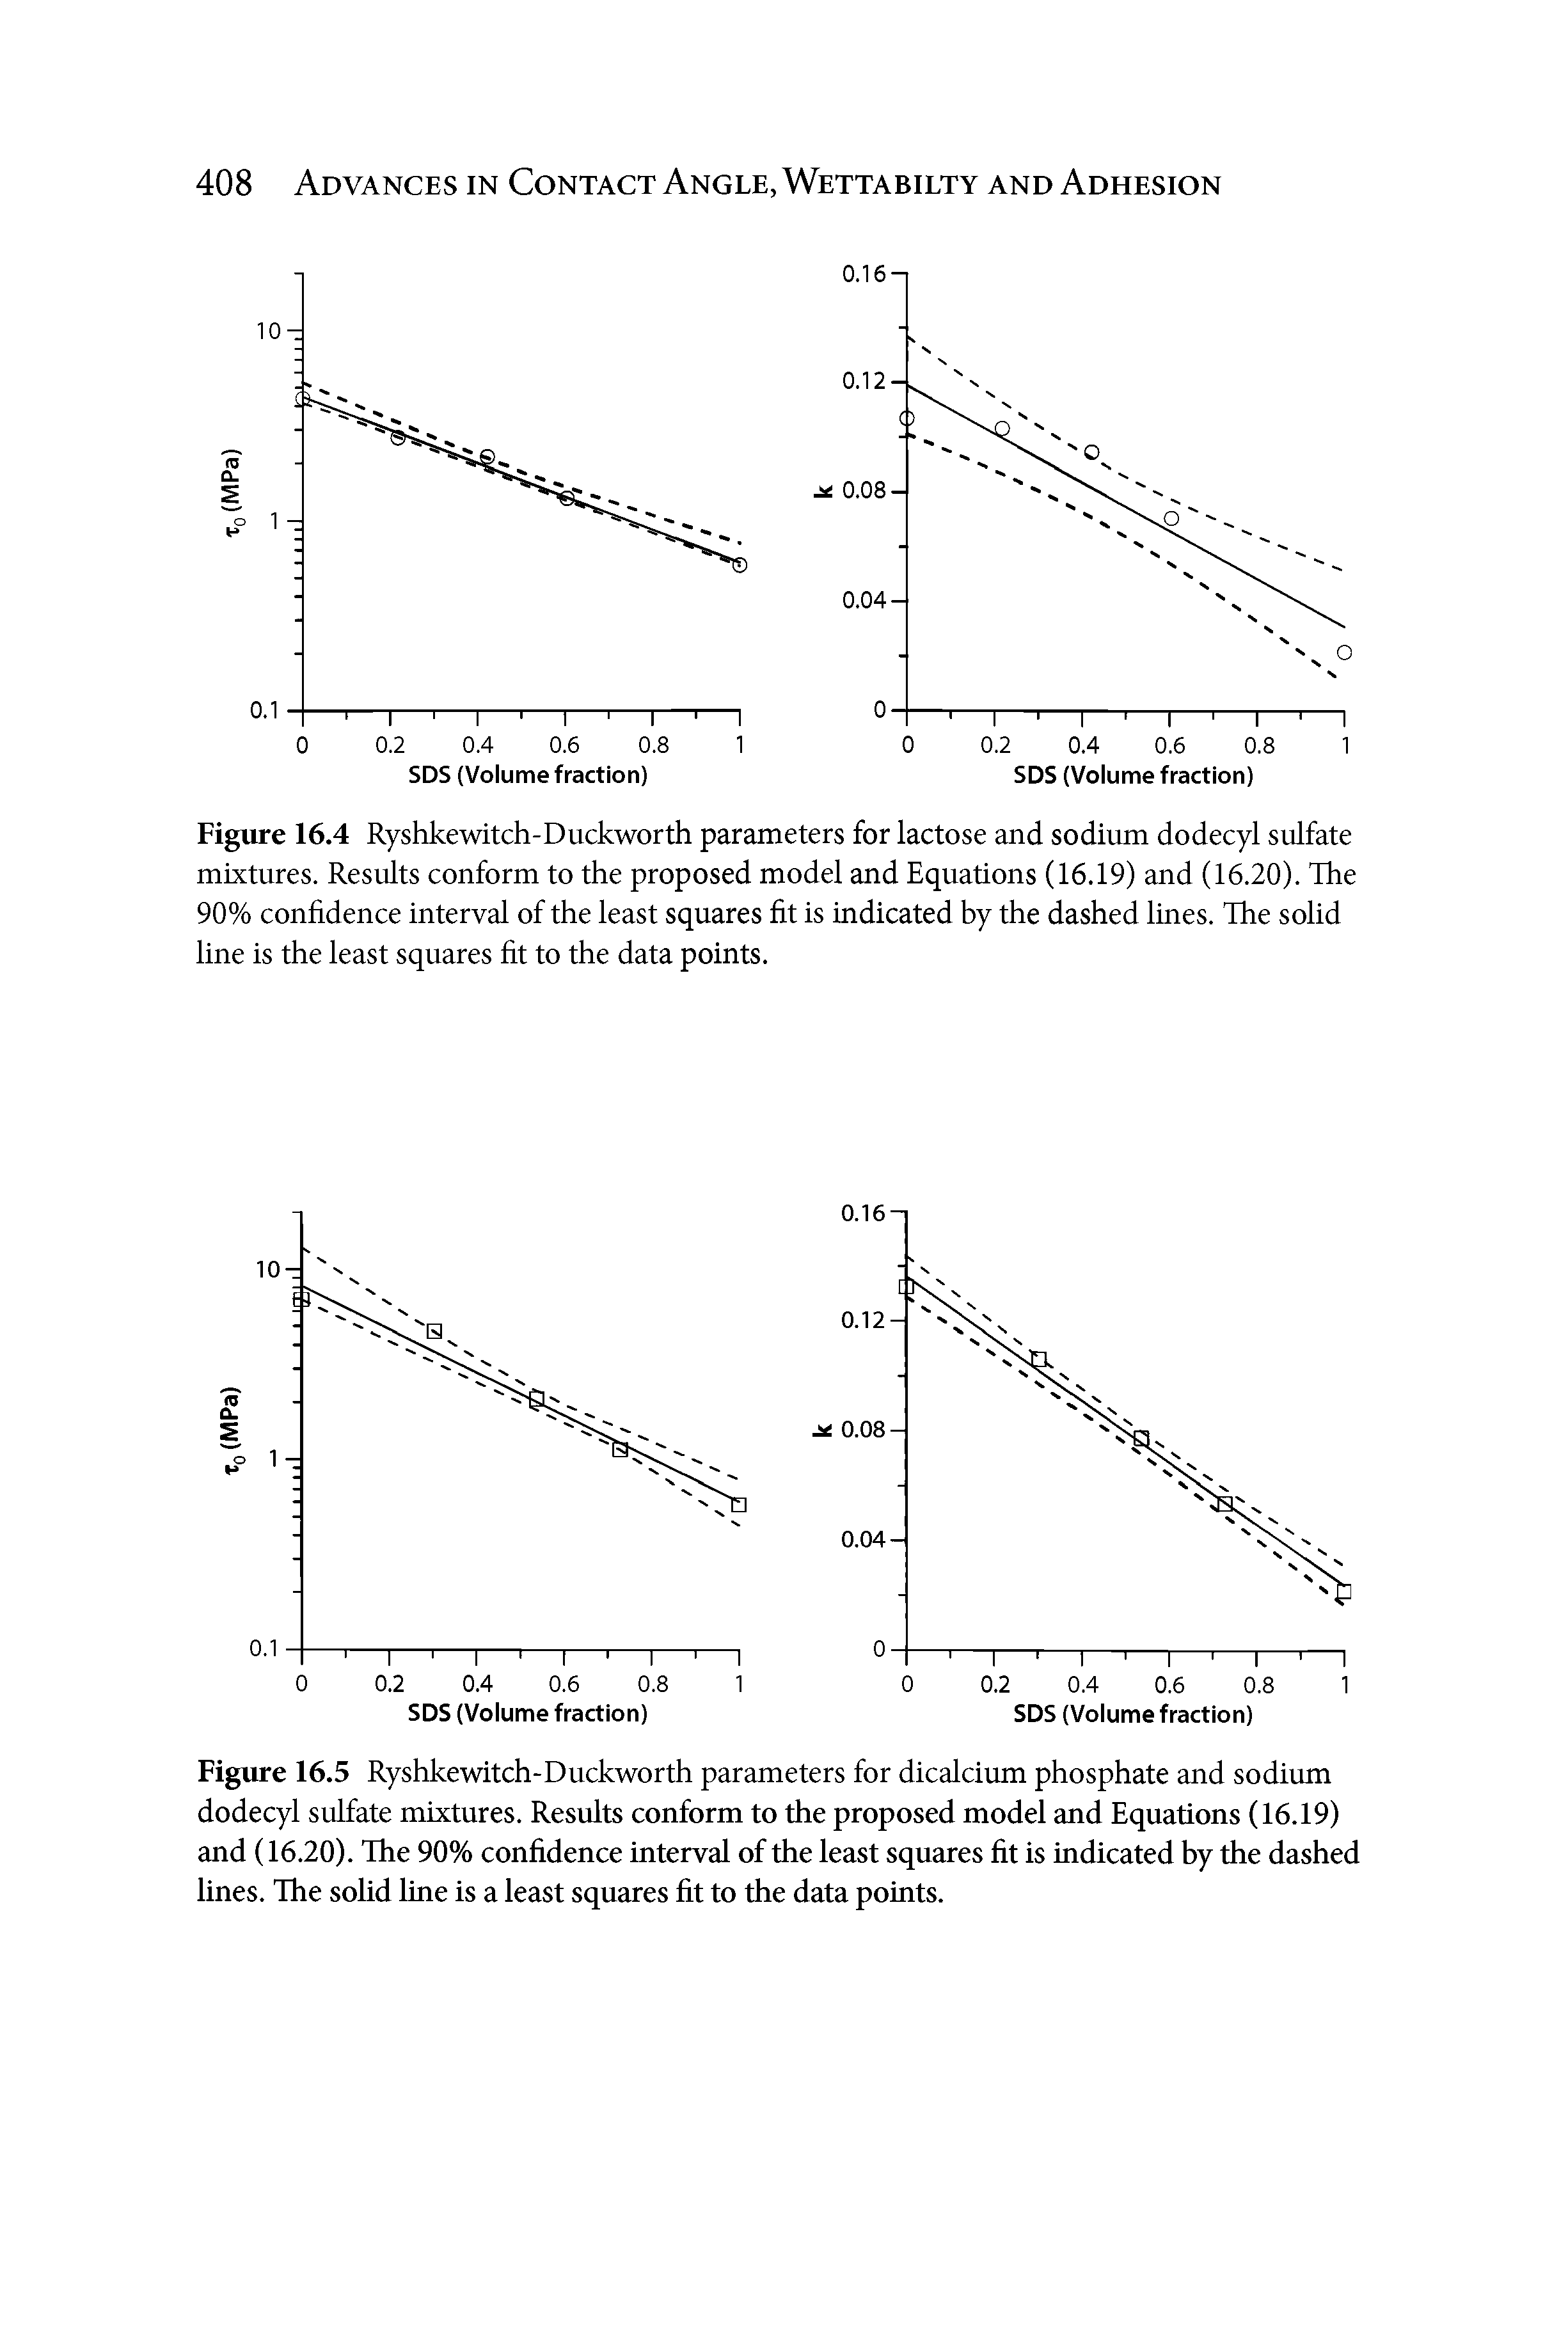 Figure 16.4 Ryshkewitch-Duckworth parameters for lactose and sodium dodecyl sulfate mixtures. Results conform to the proposed model and Equations (16.19) and (16.20). The 90% confidence interval of the least squares fit is indicated by the dashed lines. The solid line is the least squares fit to the data points.